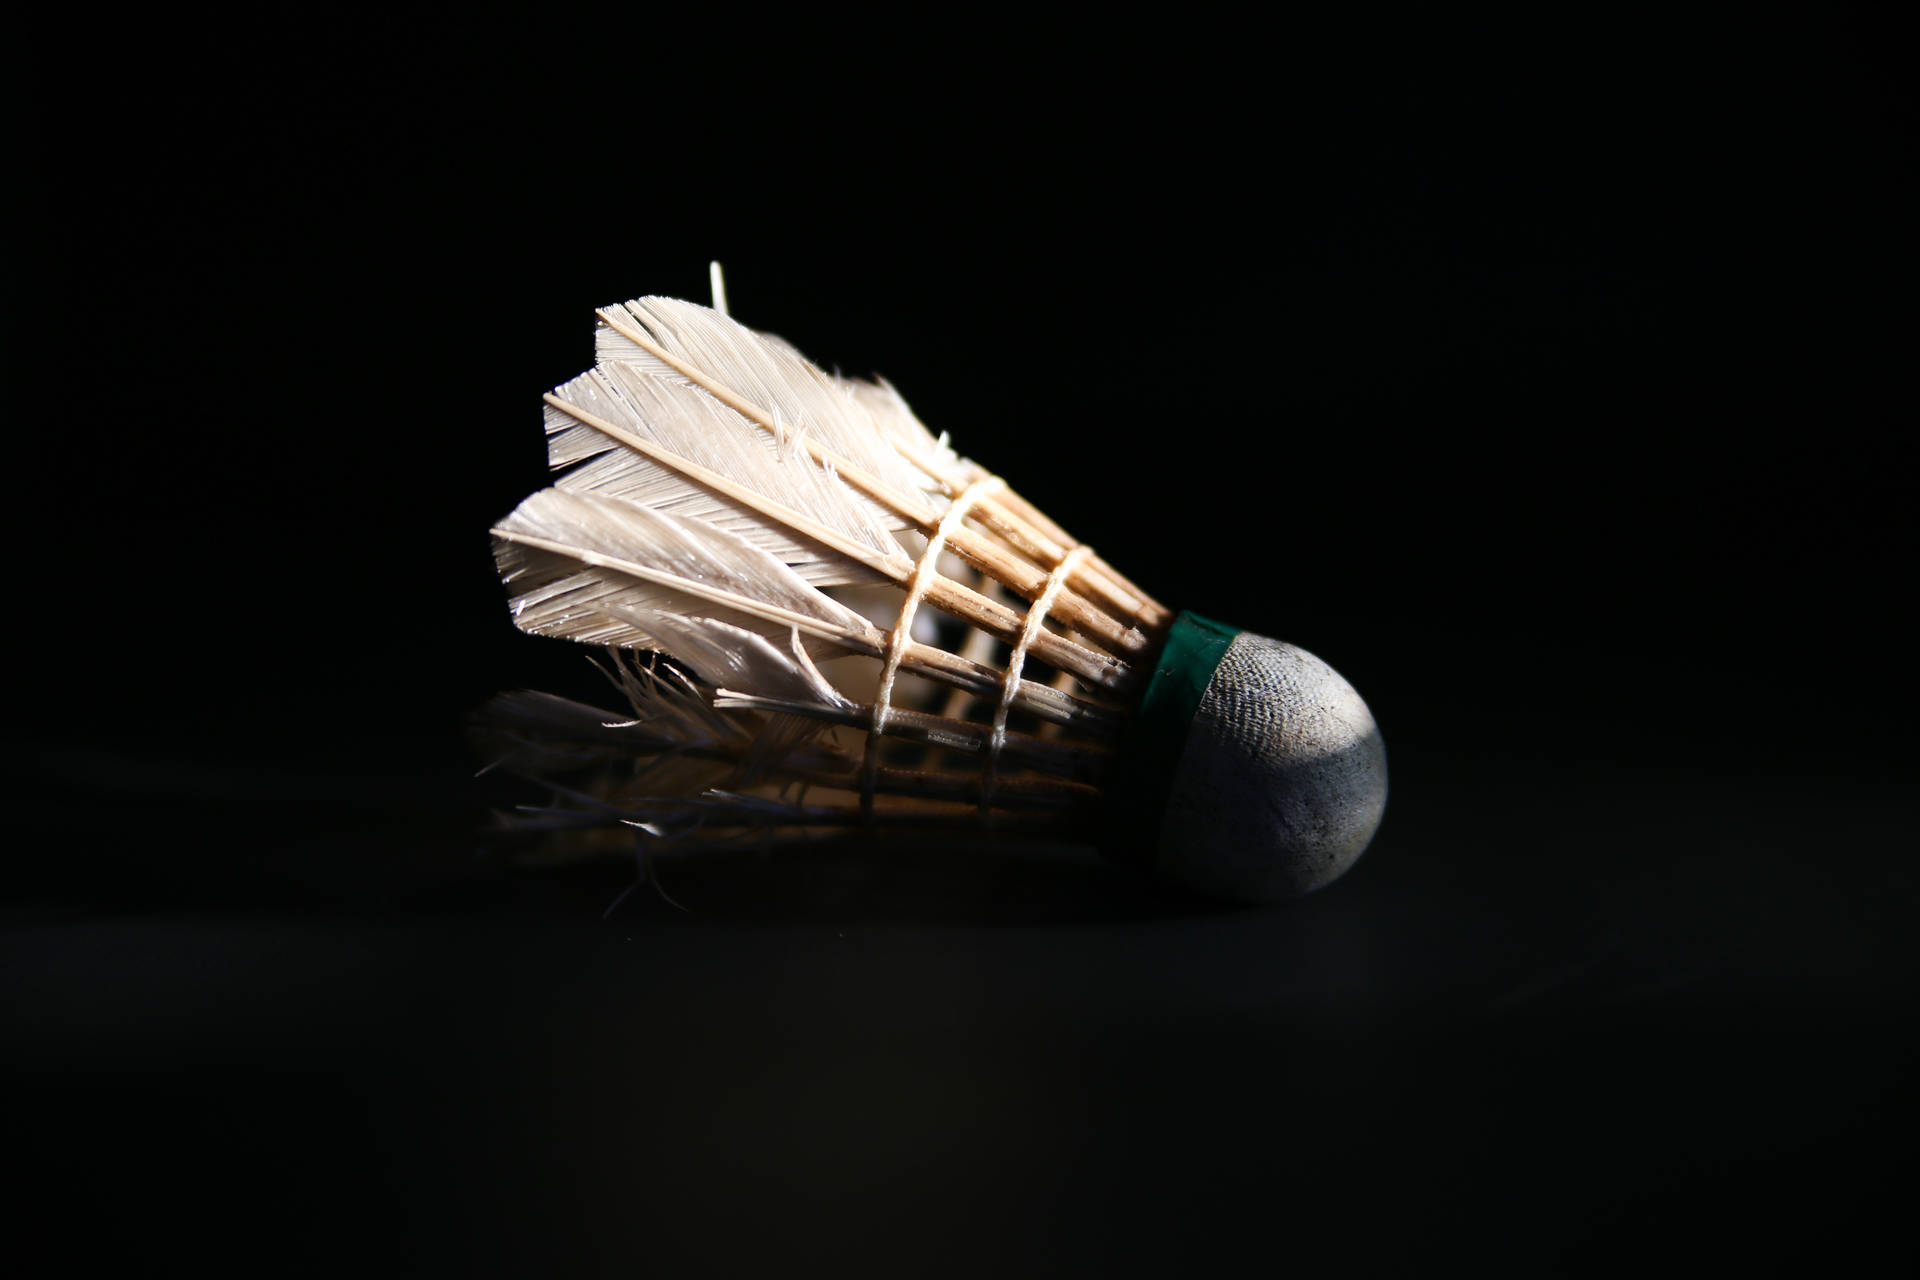 Badminton 5472X3648 Wallpaper and Background Image